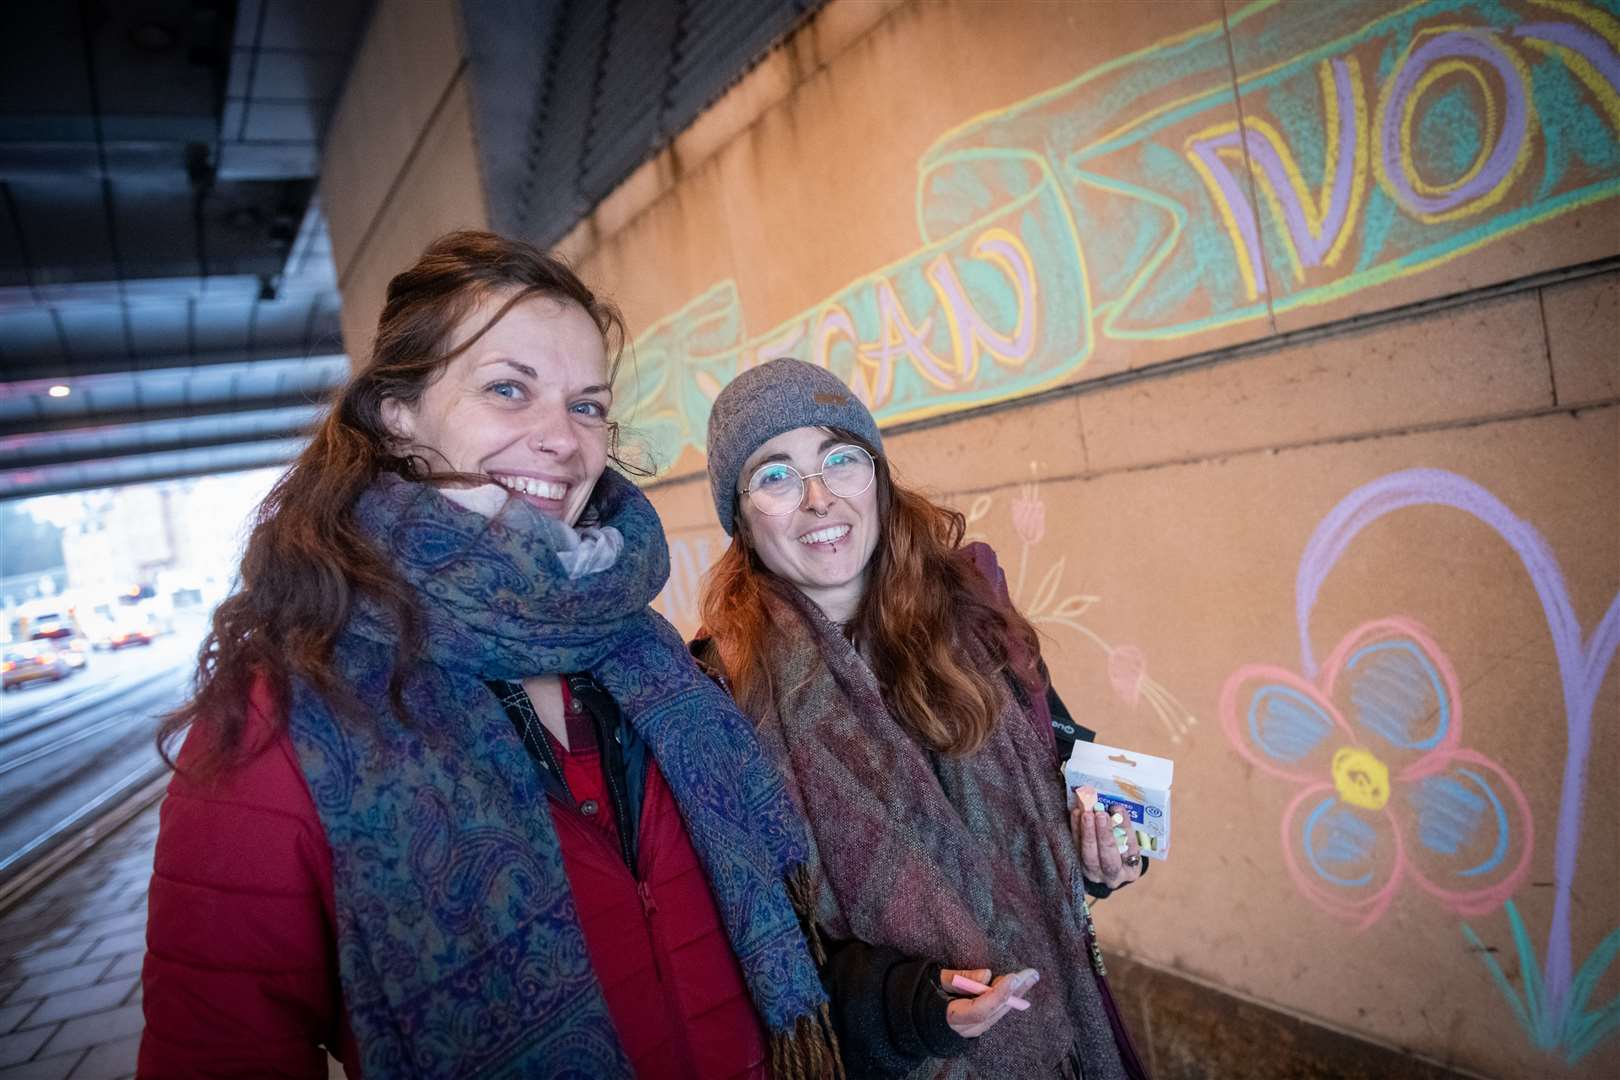 Eastgate underpass graffiti by Bee Vegan and Chloe Ferrier.